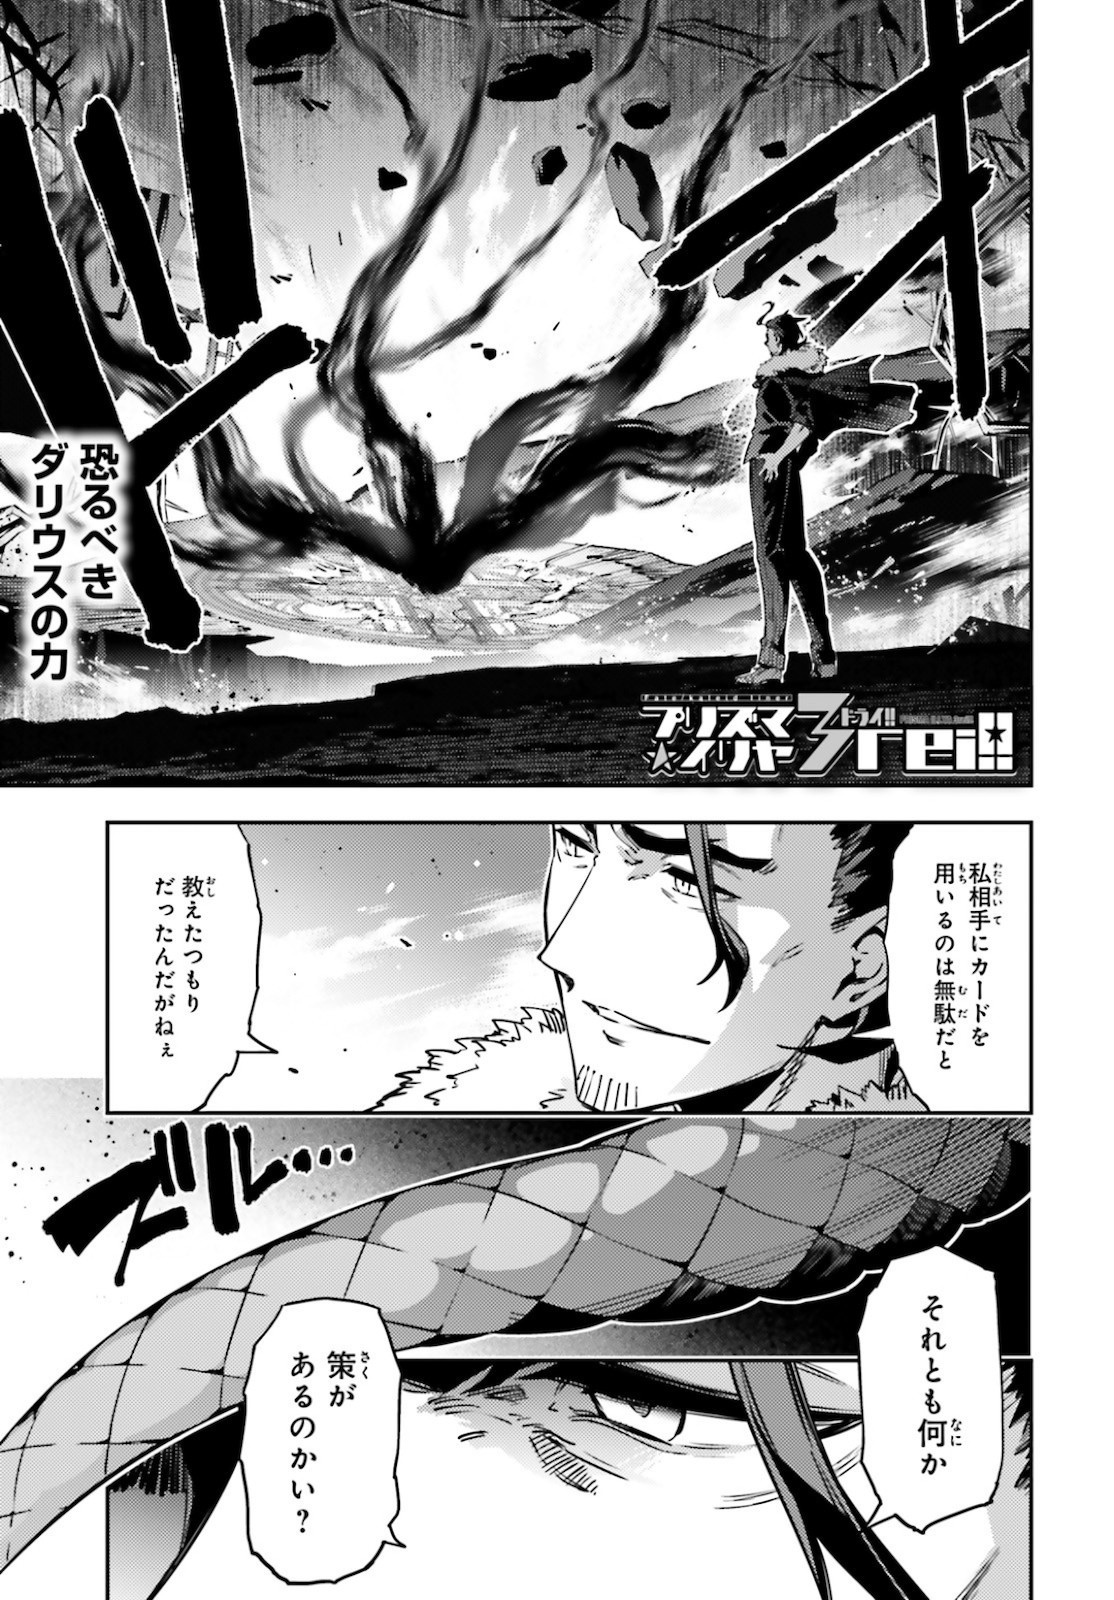 Fate/Kaleid Liner Prisma Illya Drei! - Chapter 59-1 - Page 1